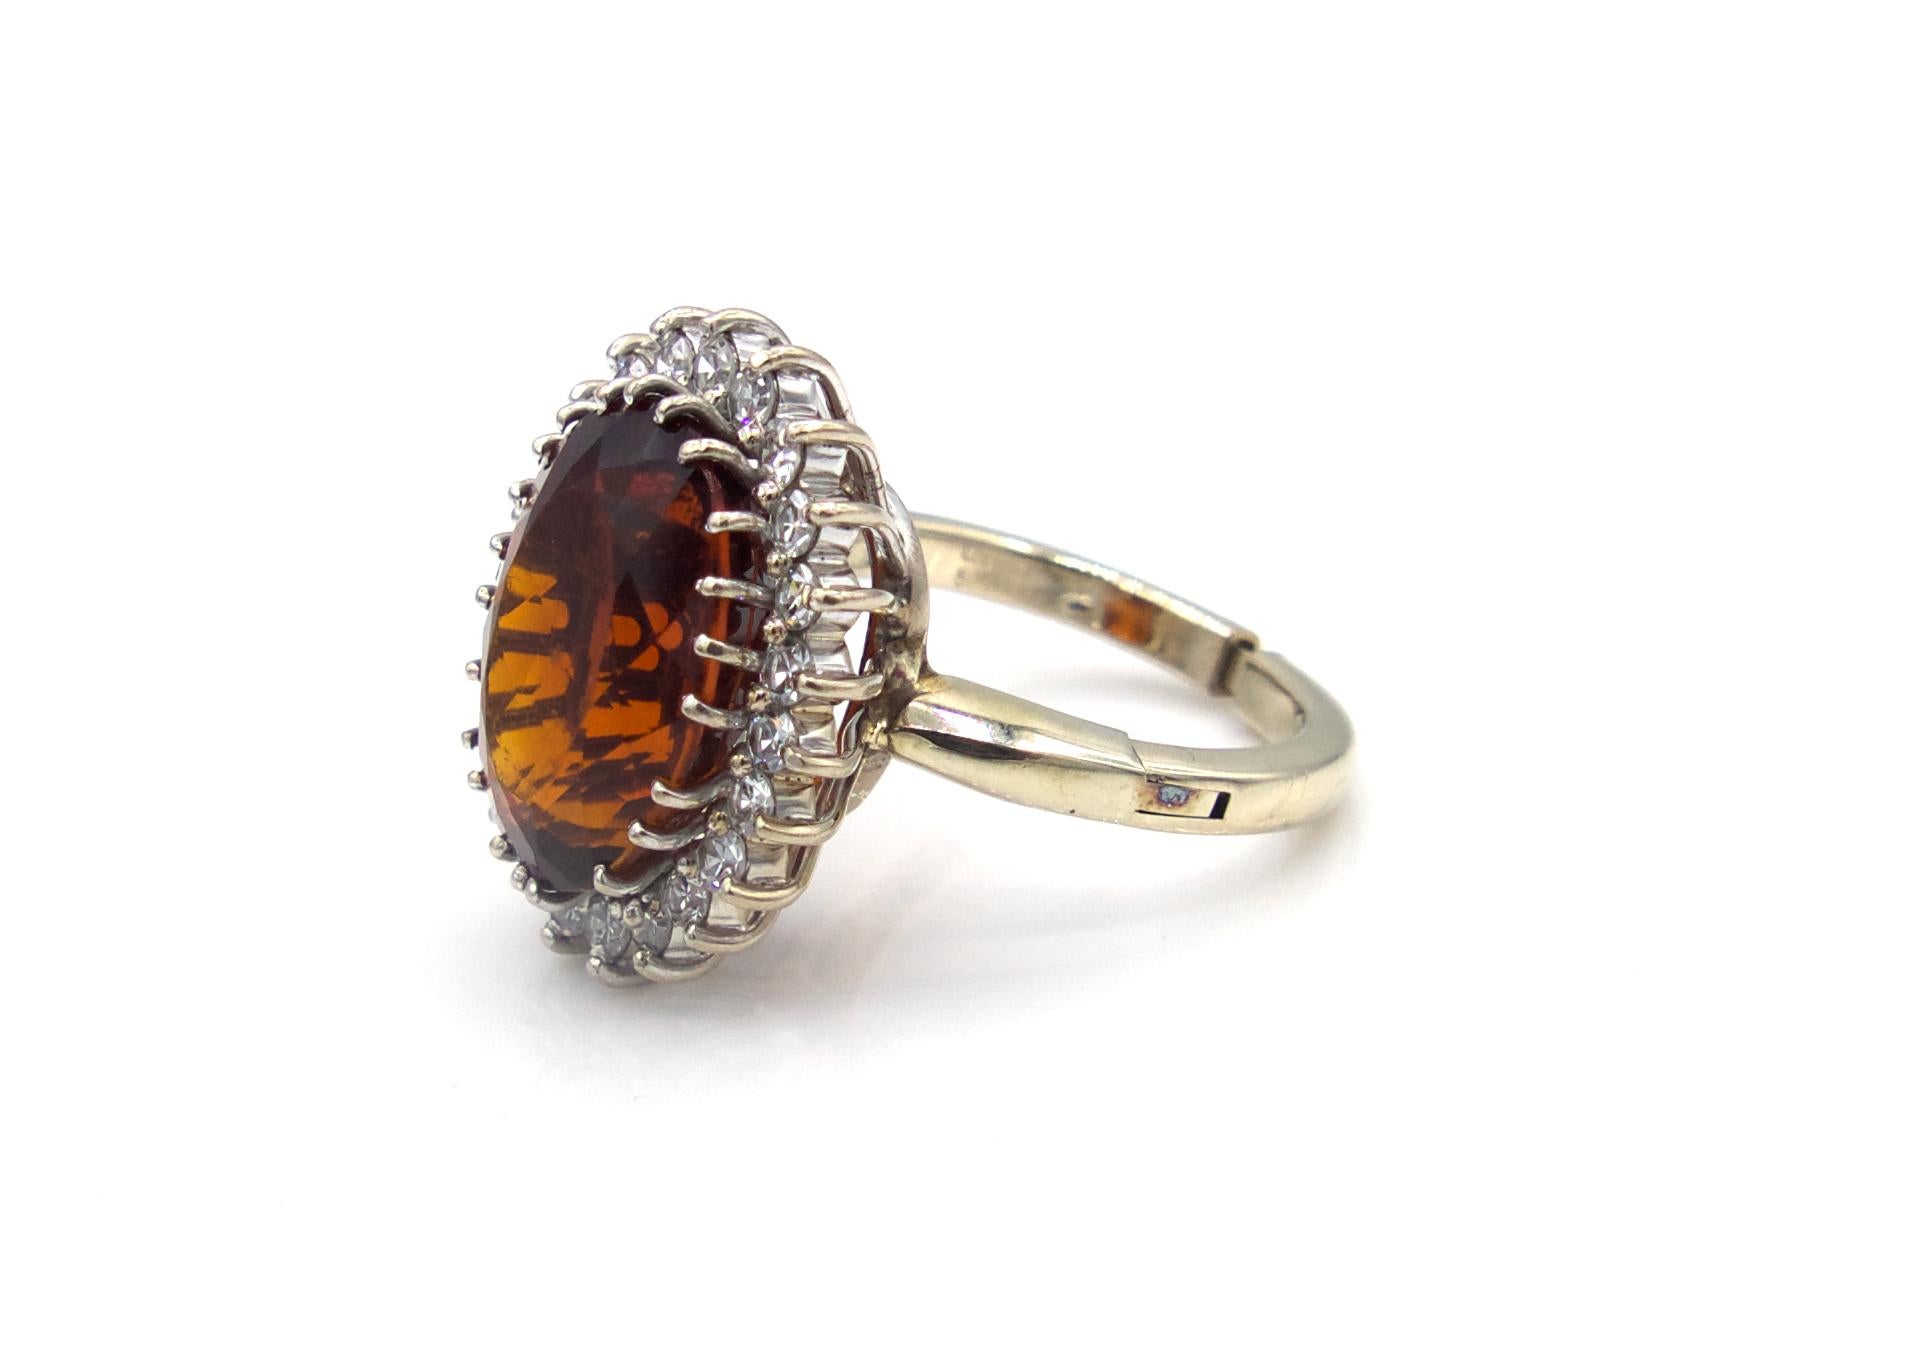 This oval-faceted cinnamon hessonite garnet cocktail ring is set in a 14 K gold band and is surrounded by 22 round cut diamonds. The adjustable mechanical band on this ring makes it a perfect fit for many. 

7.4 g

Size 5-7.5